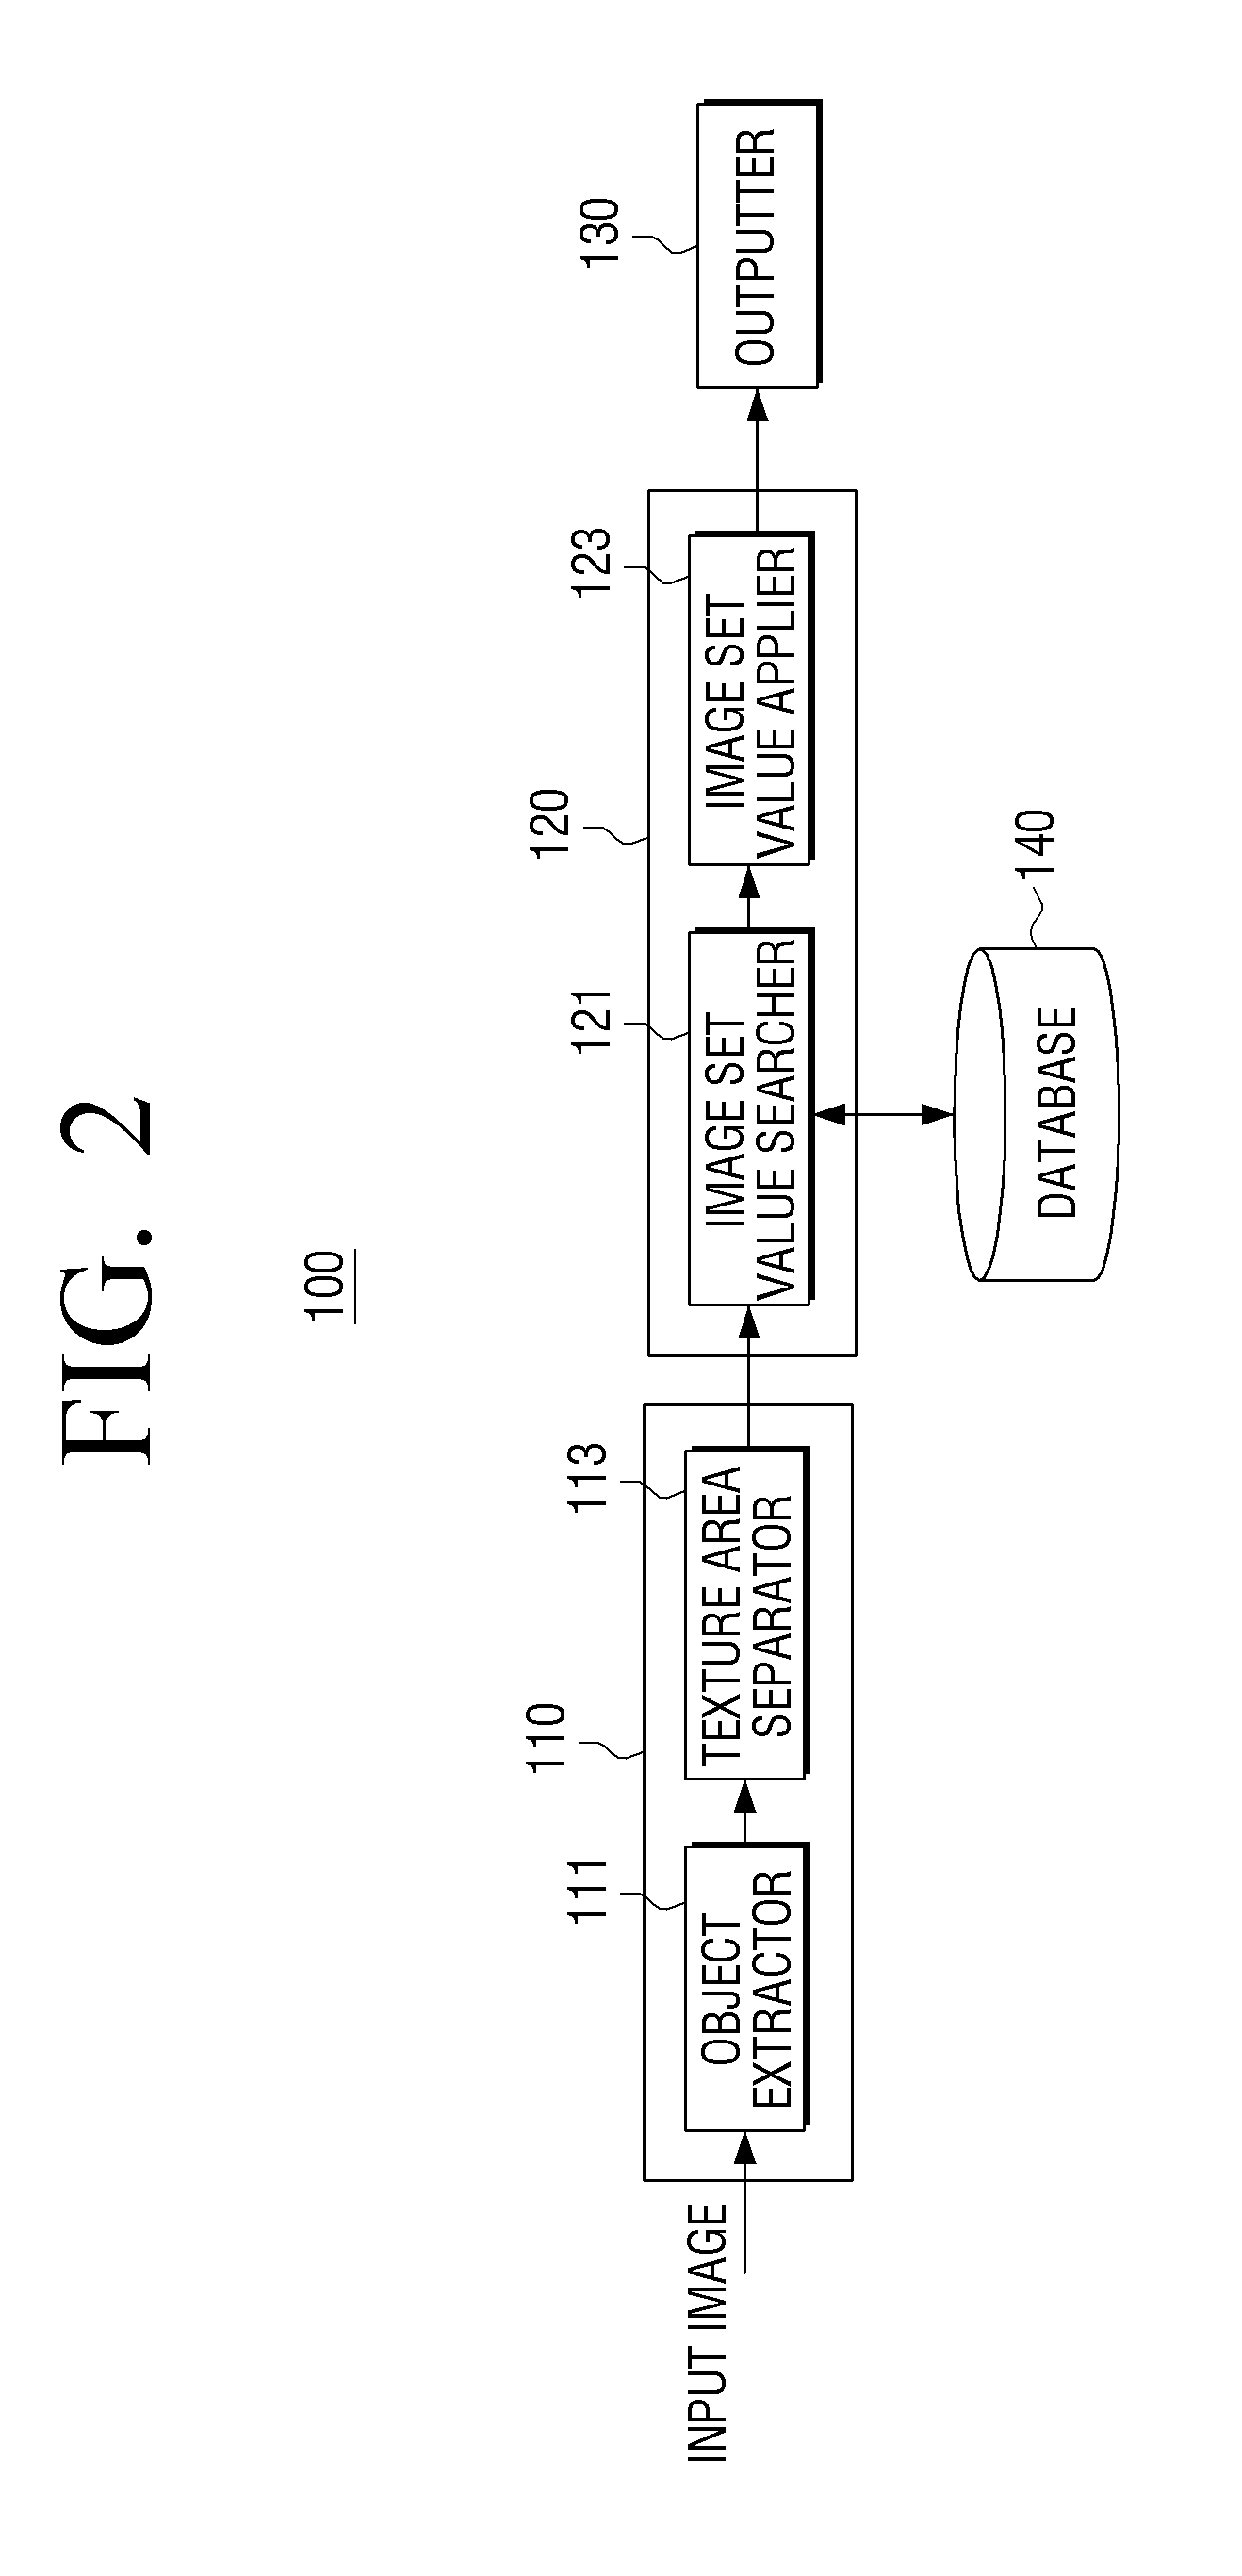 Apparatus and method for processing image